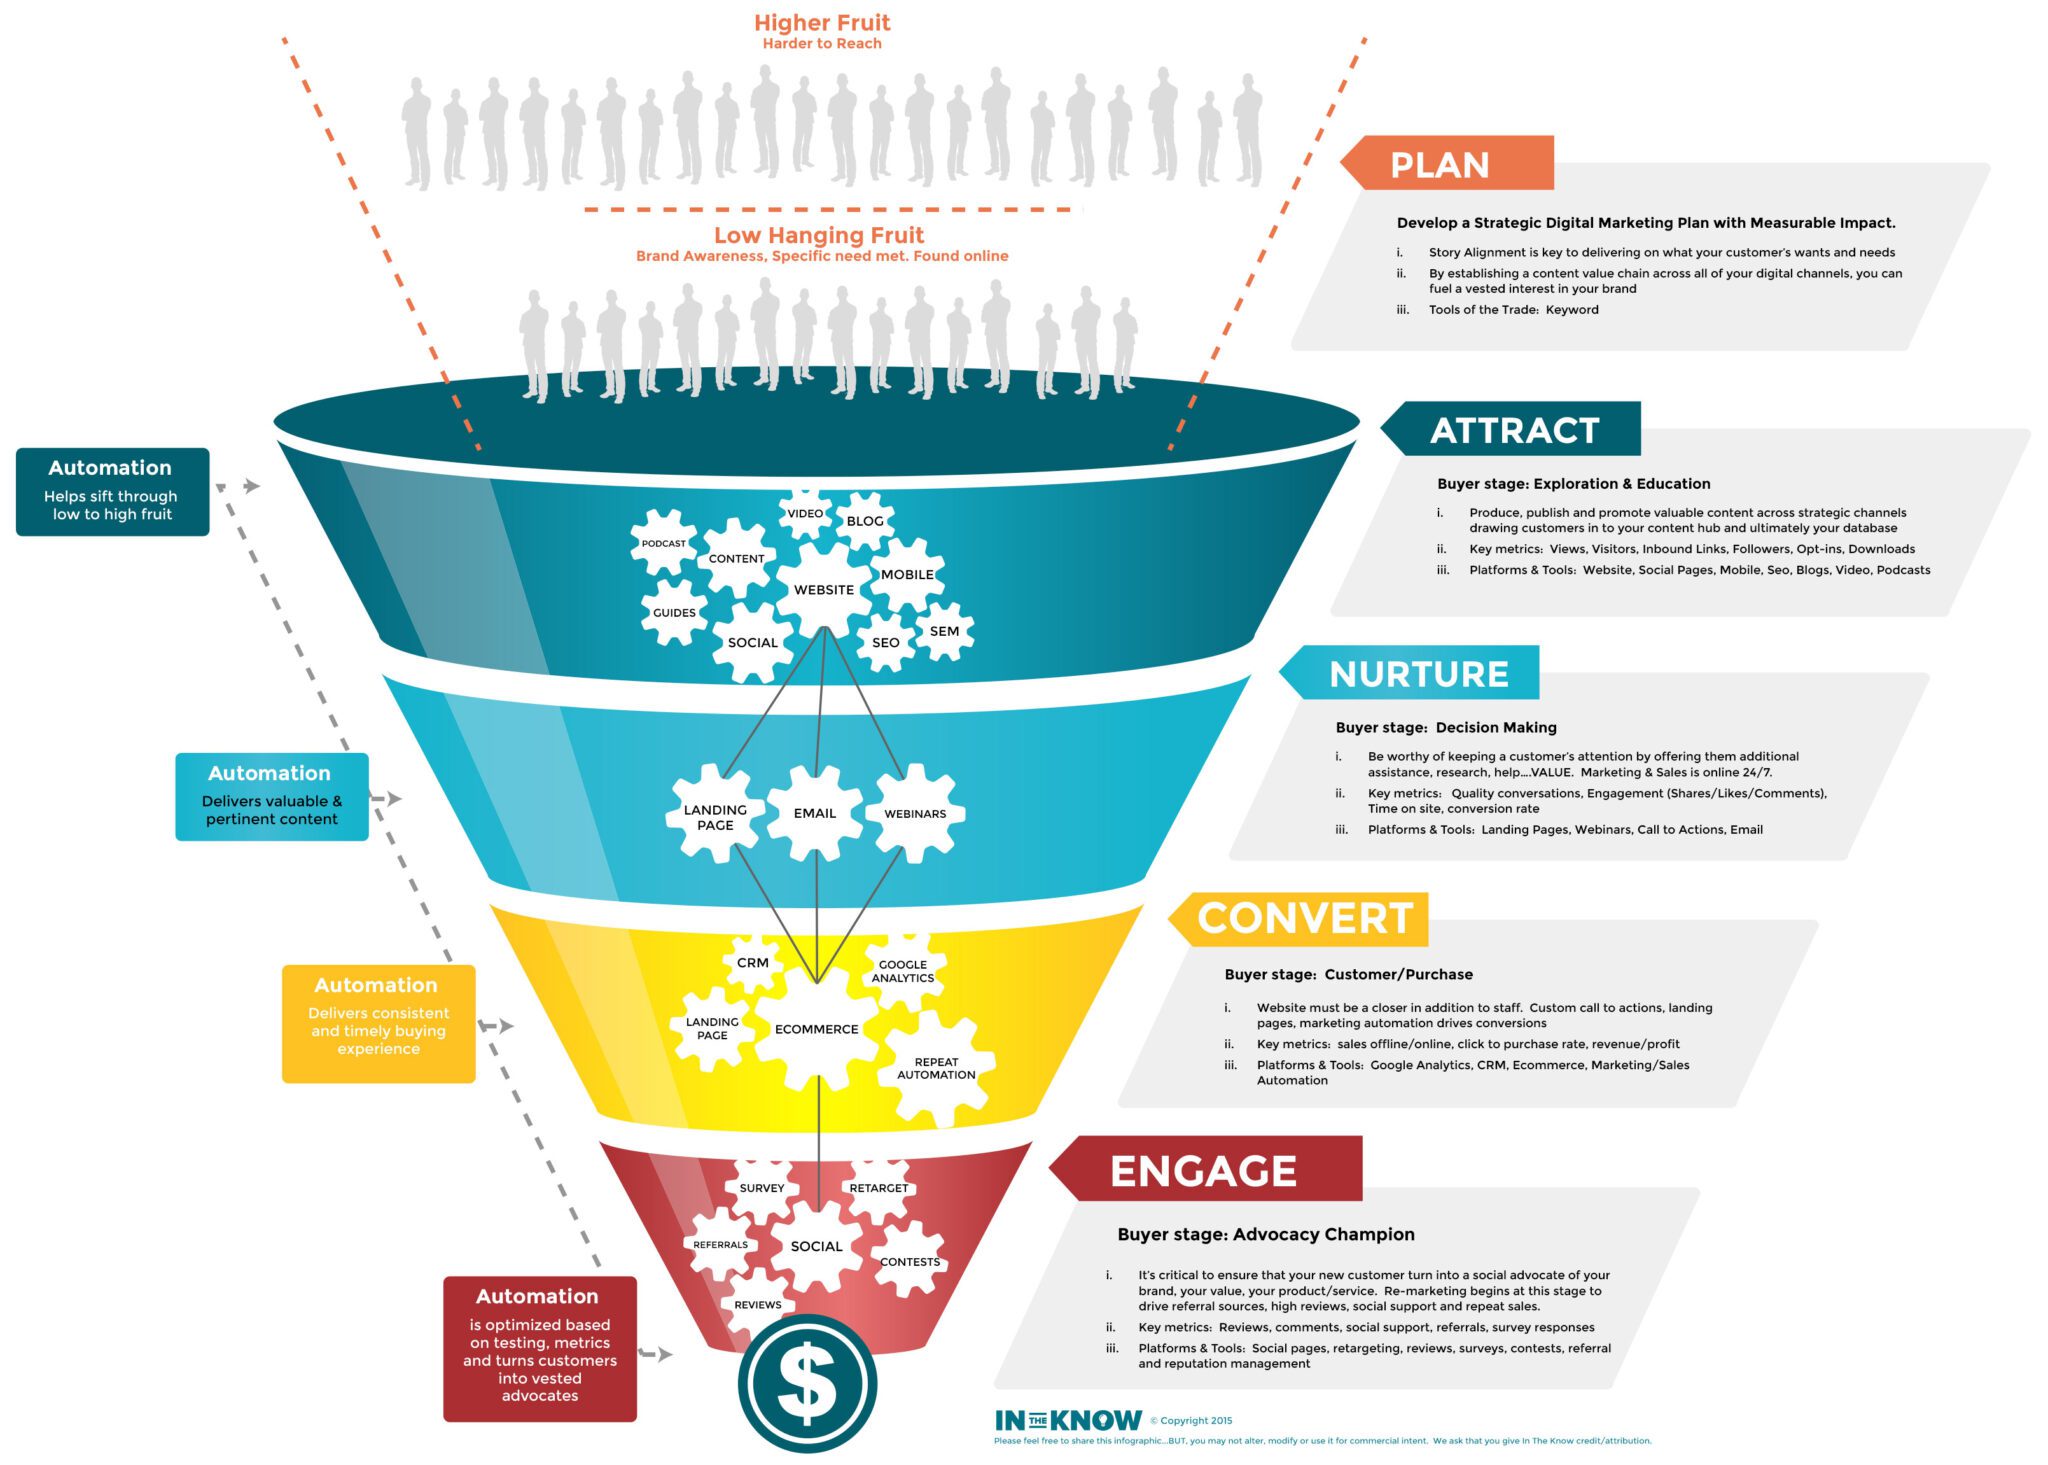 The lead generation funnel